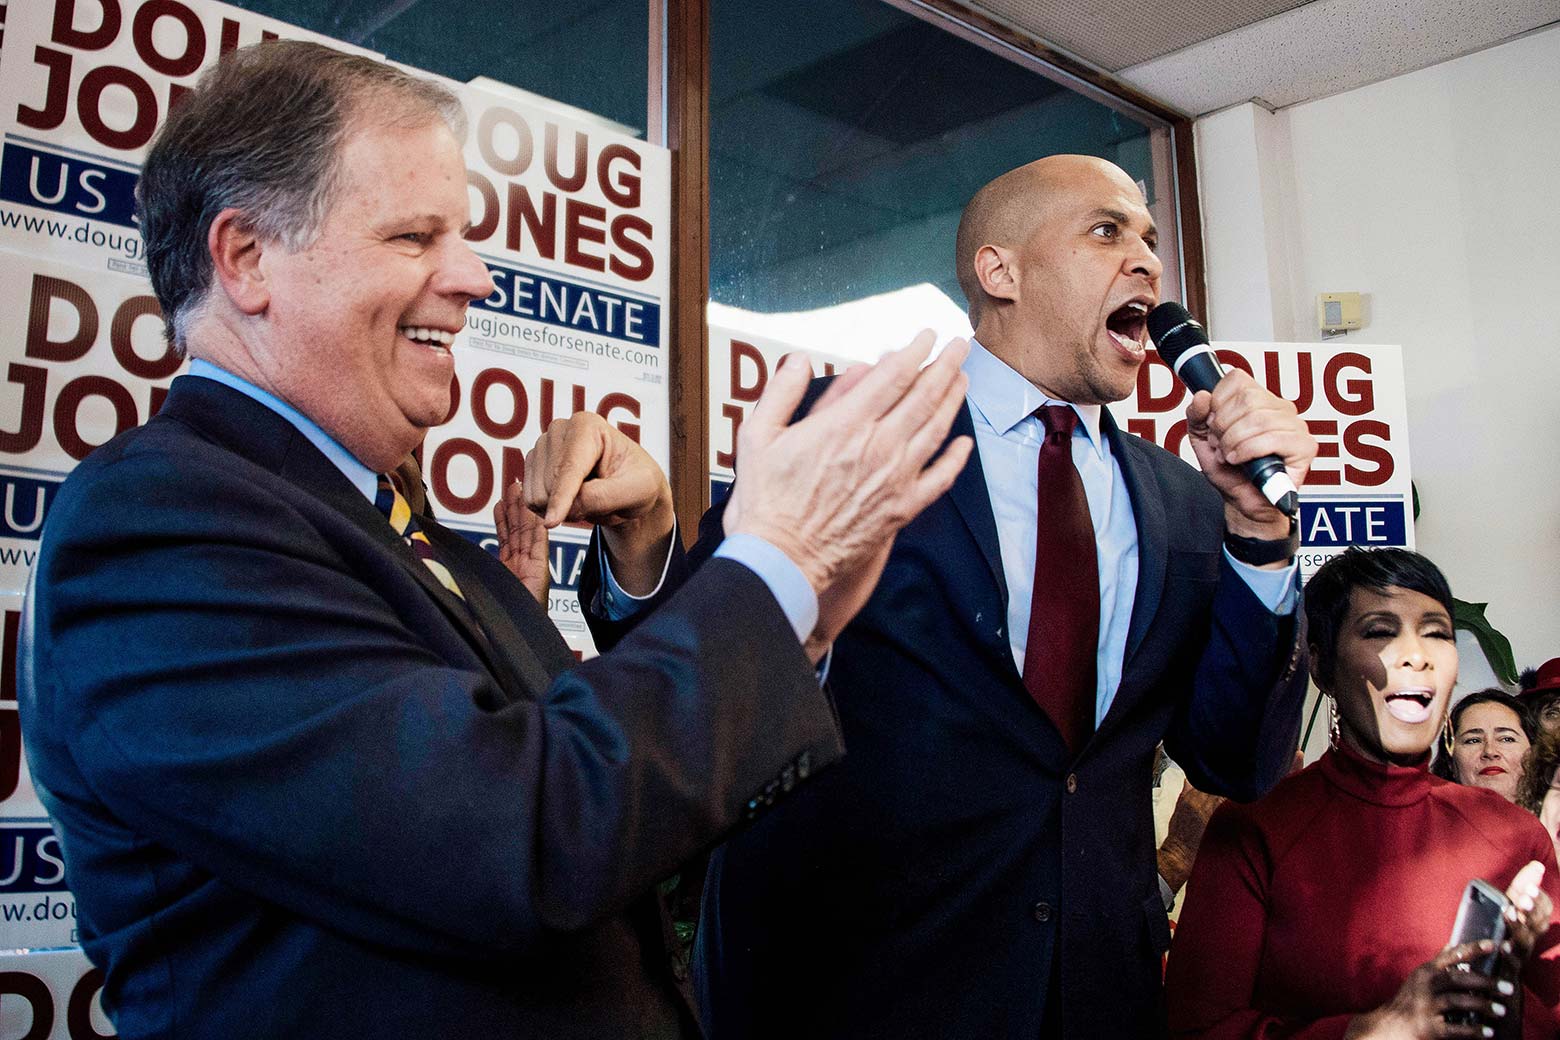 Cory Booker at a campaign event with Doug Jones.